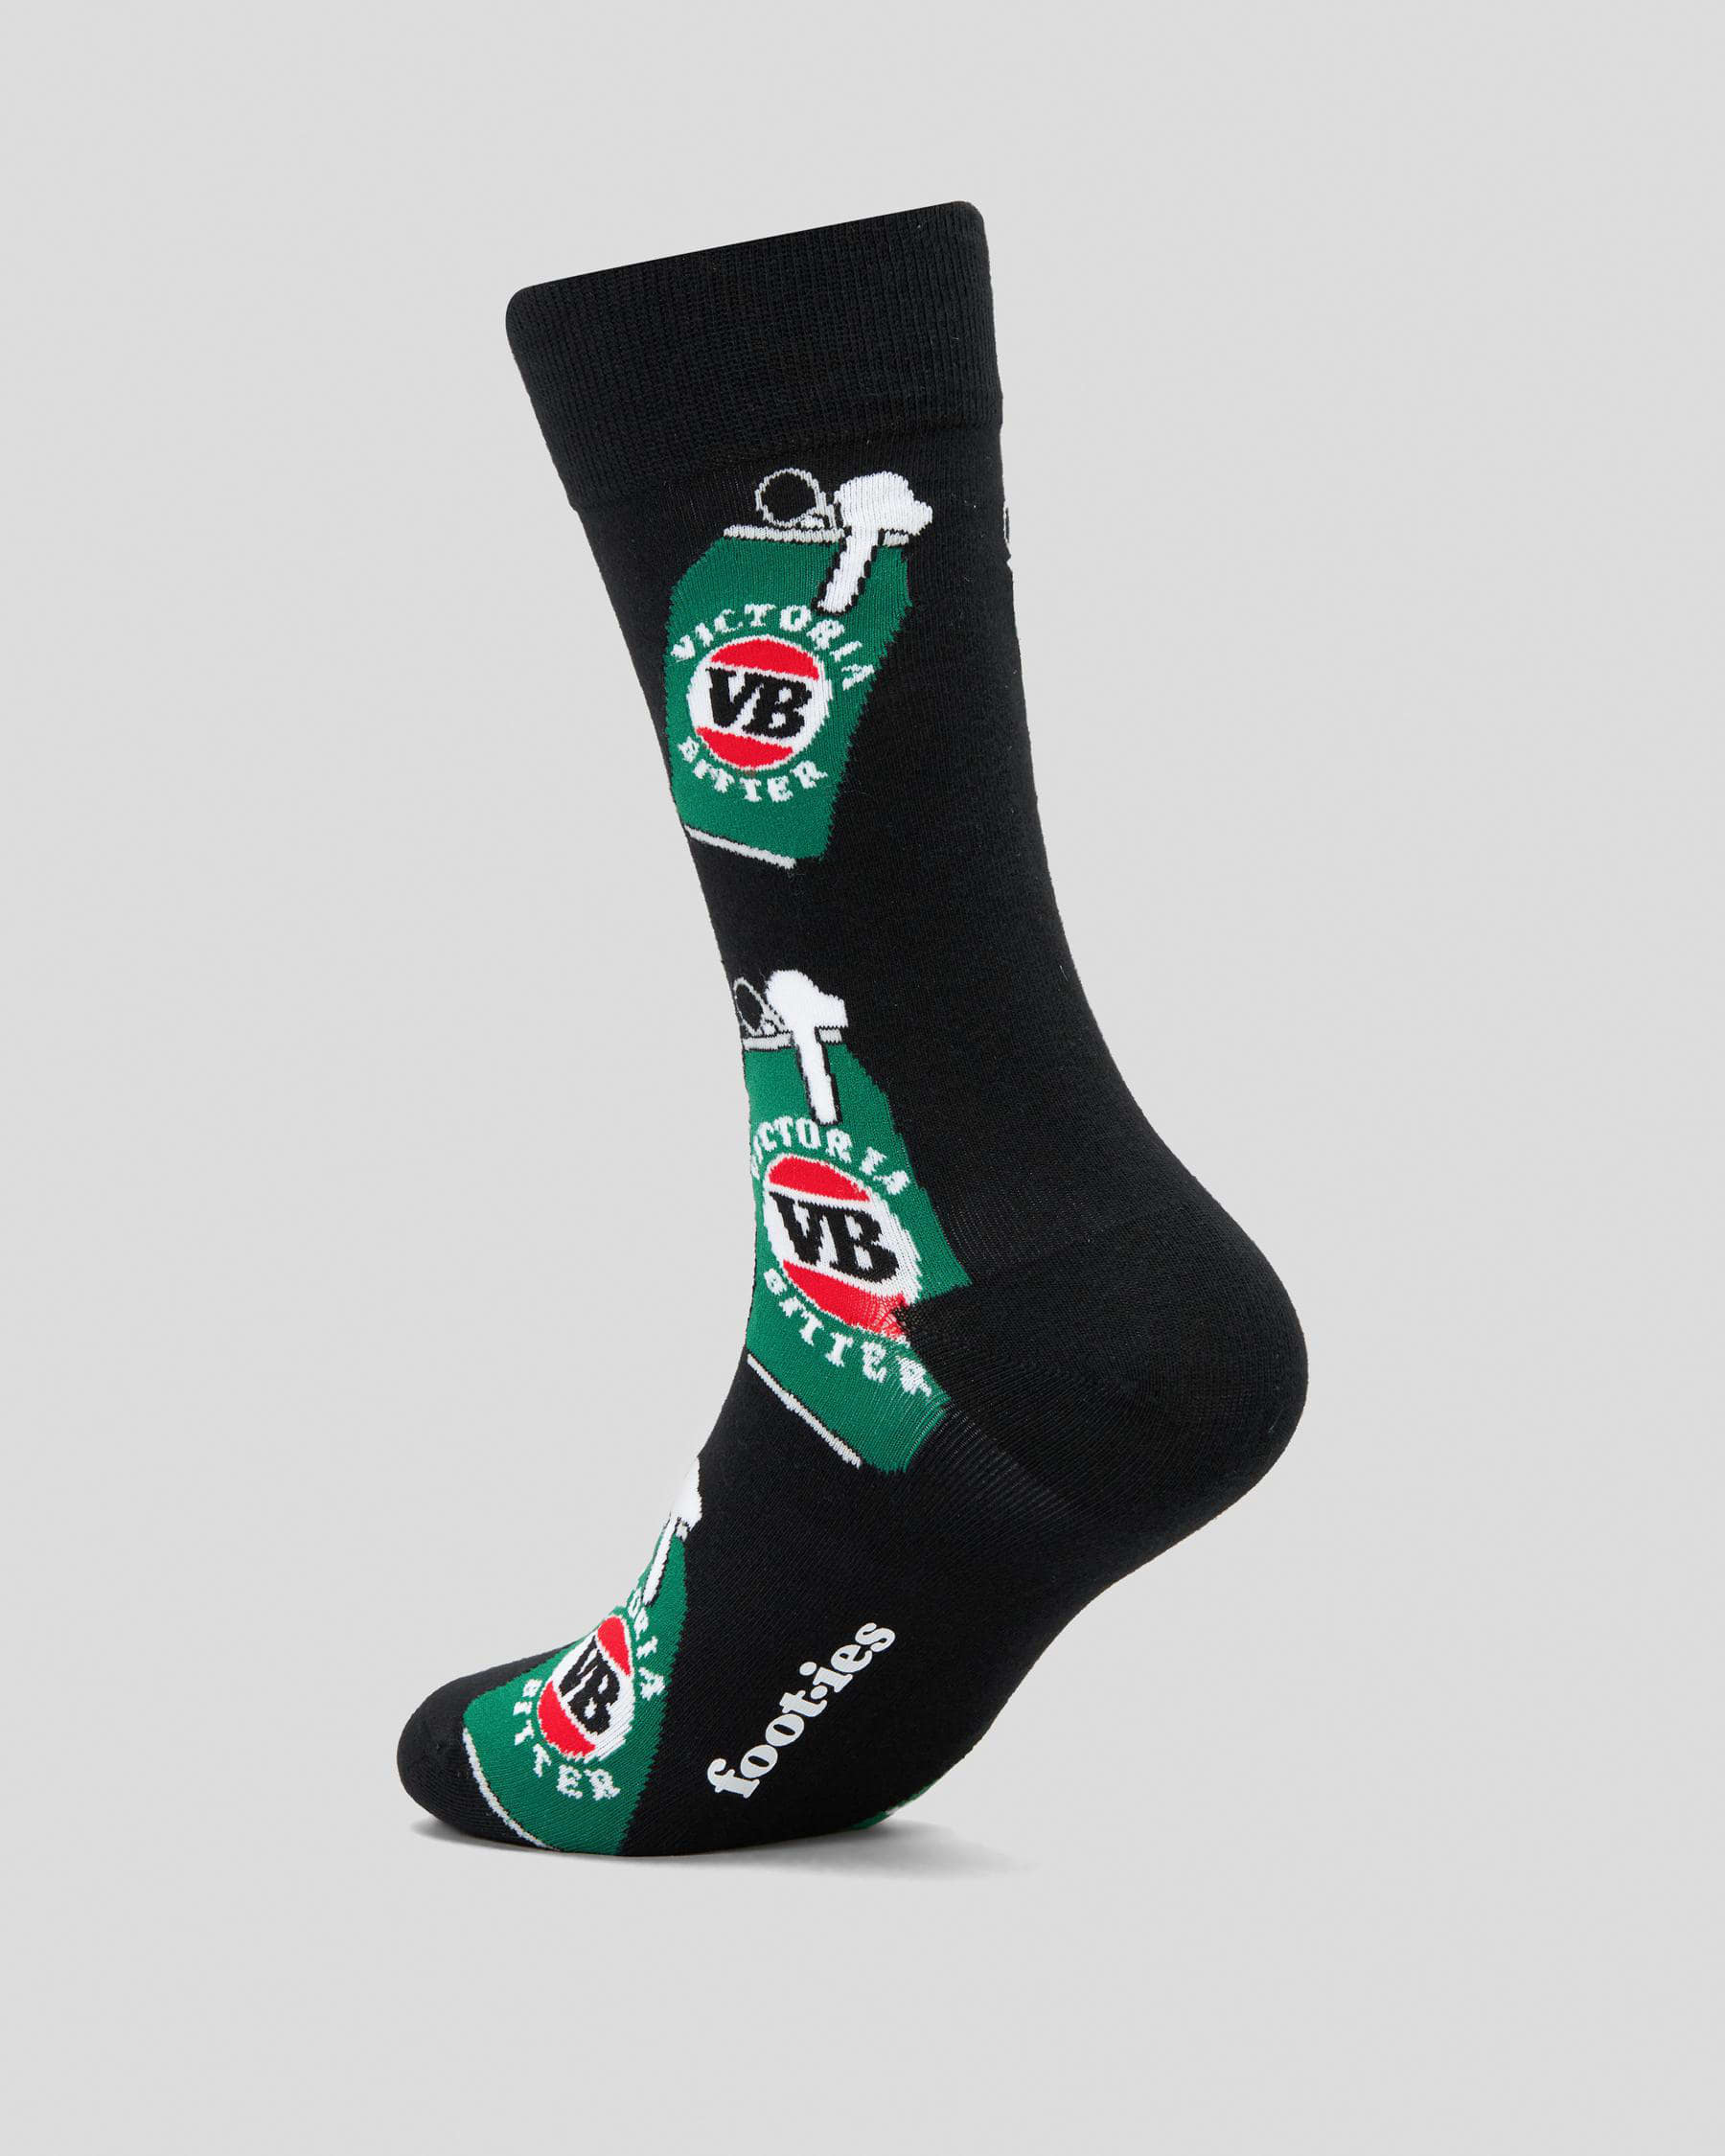 FOOT-IES VB Cans Socks In Black - Fast Shipping & Easy Returns - City ...